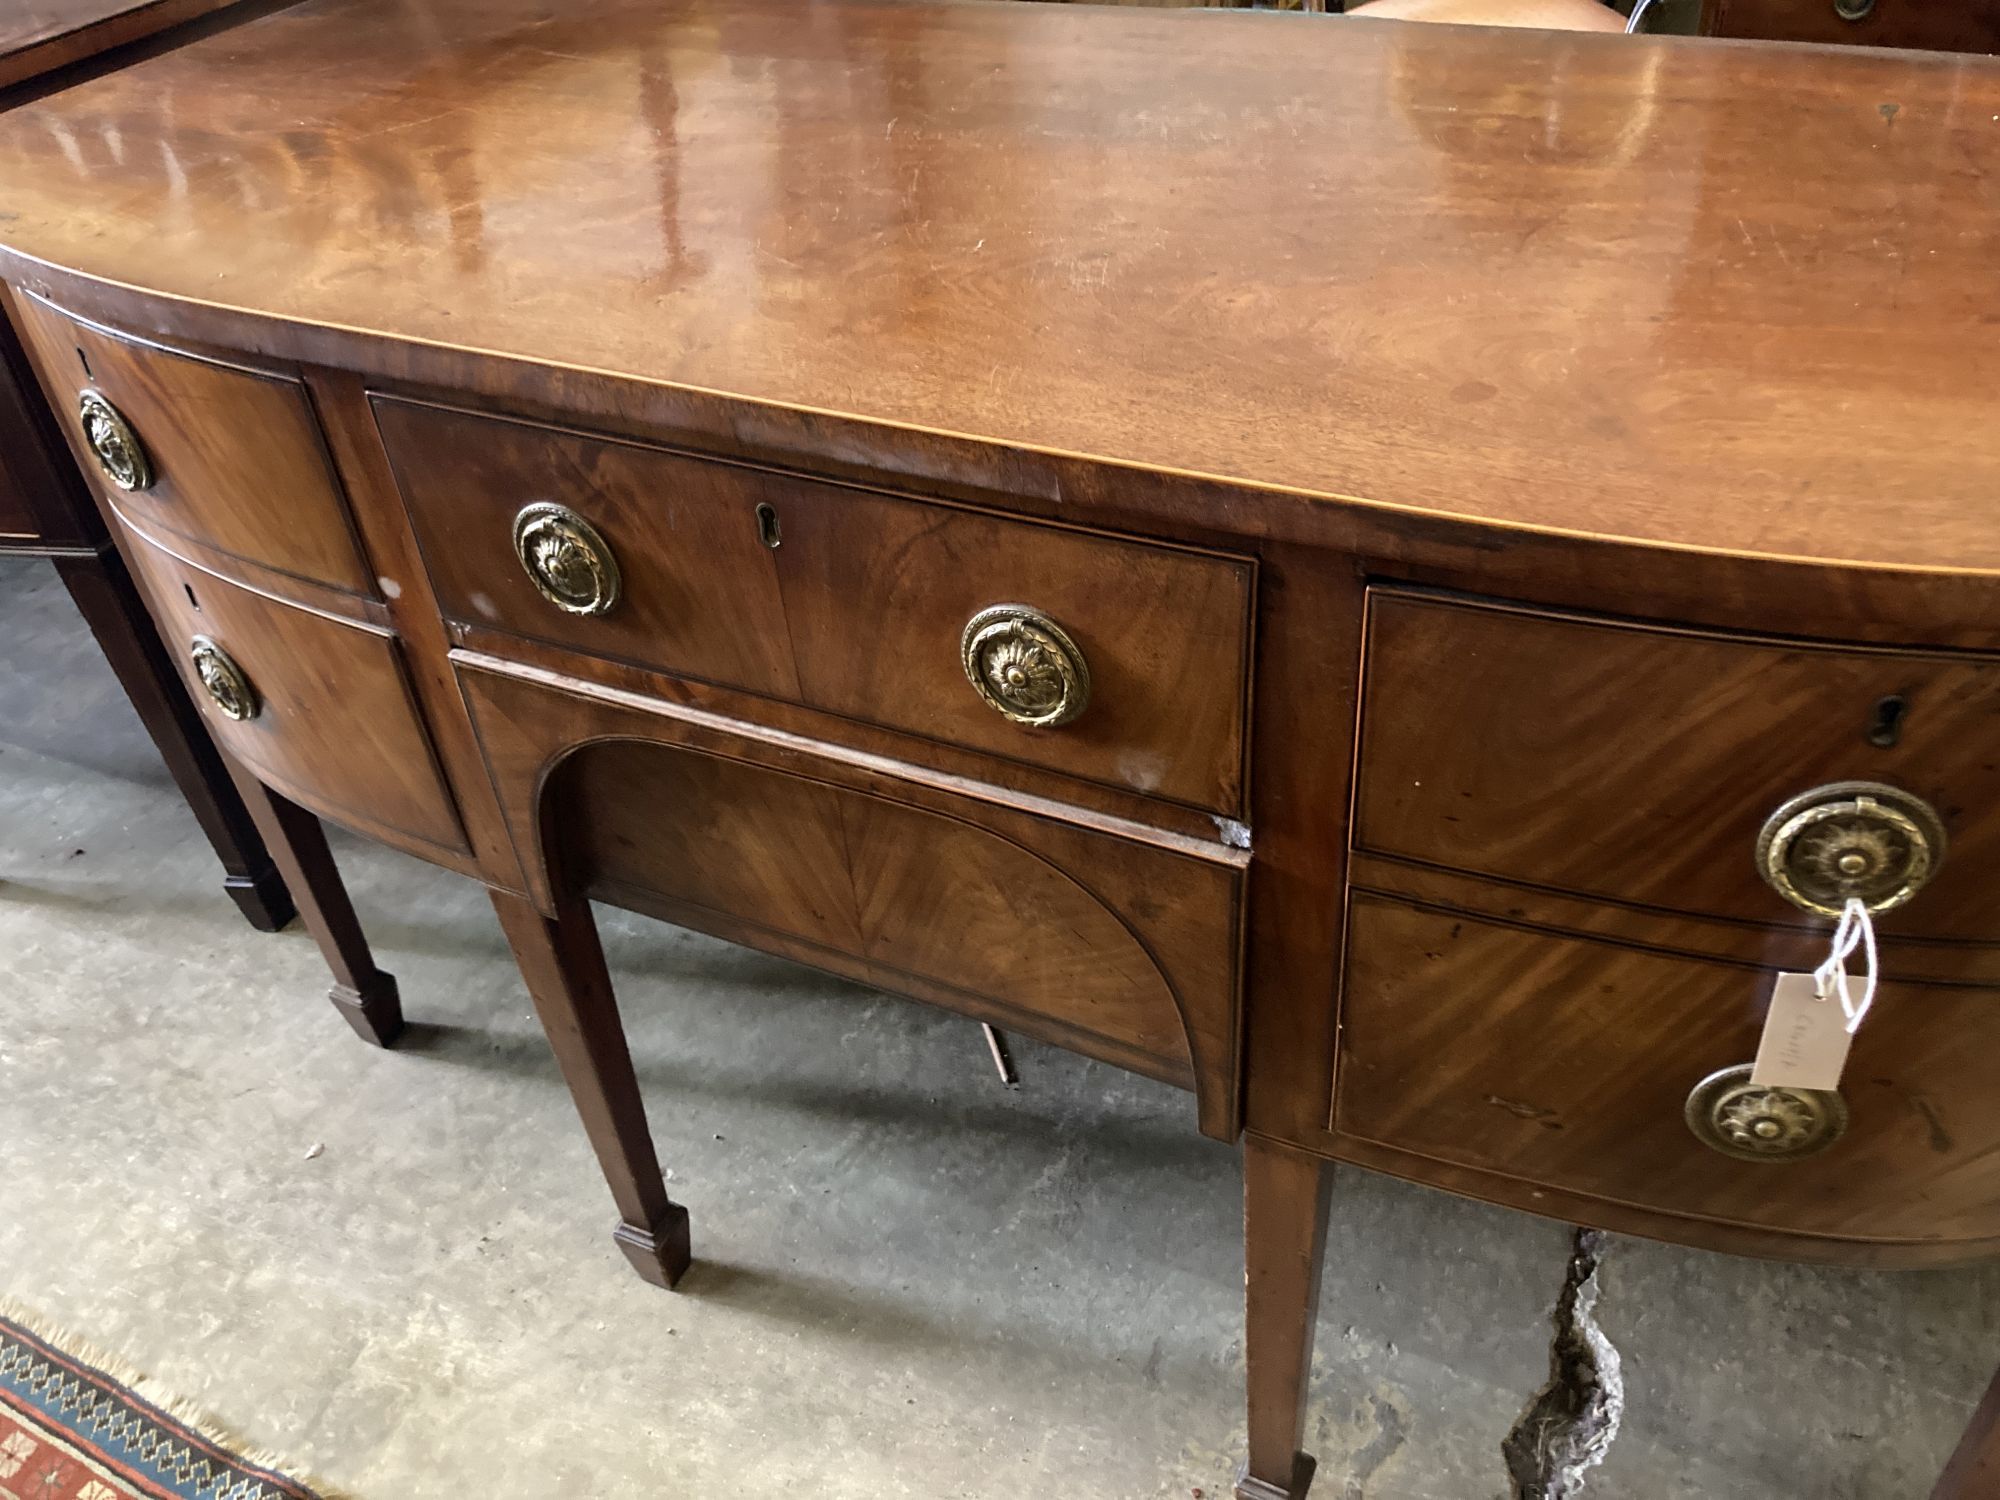 A George III mahogany bowfront sideboard, length 152cm, depth 65cm, height 92cm